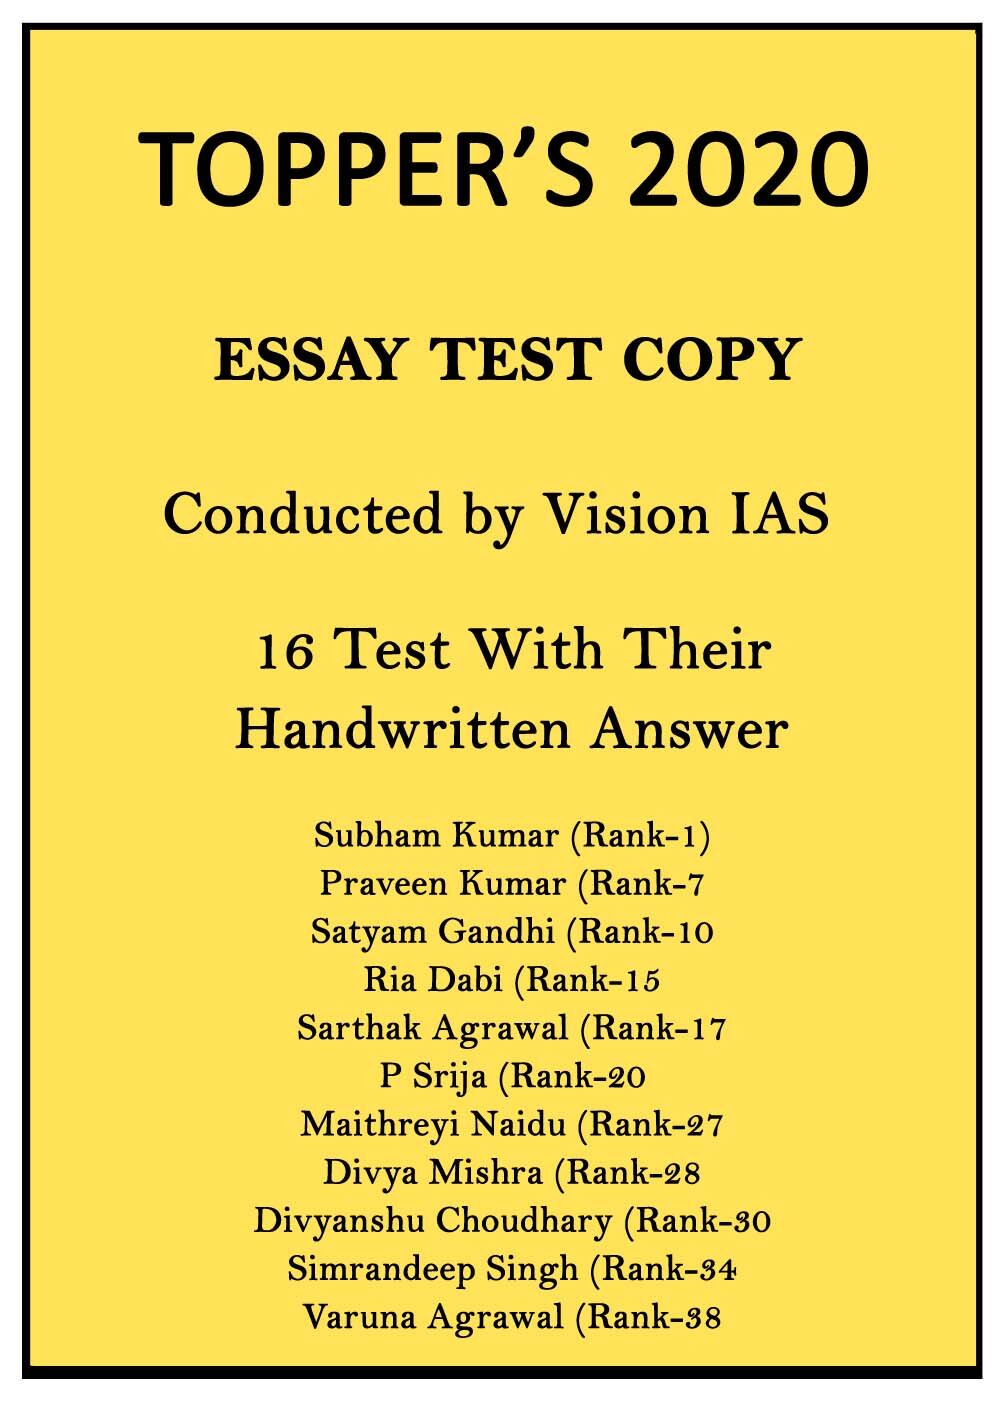 vision-ias-toppers-2020-essay-handwritten-16-test-copy-notes-in-english-for-mains